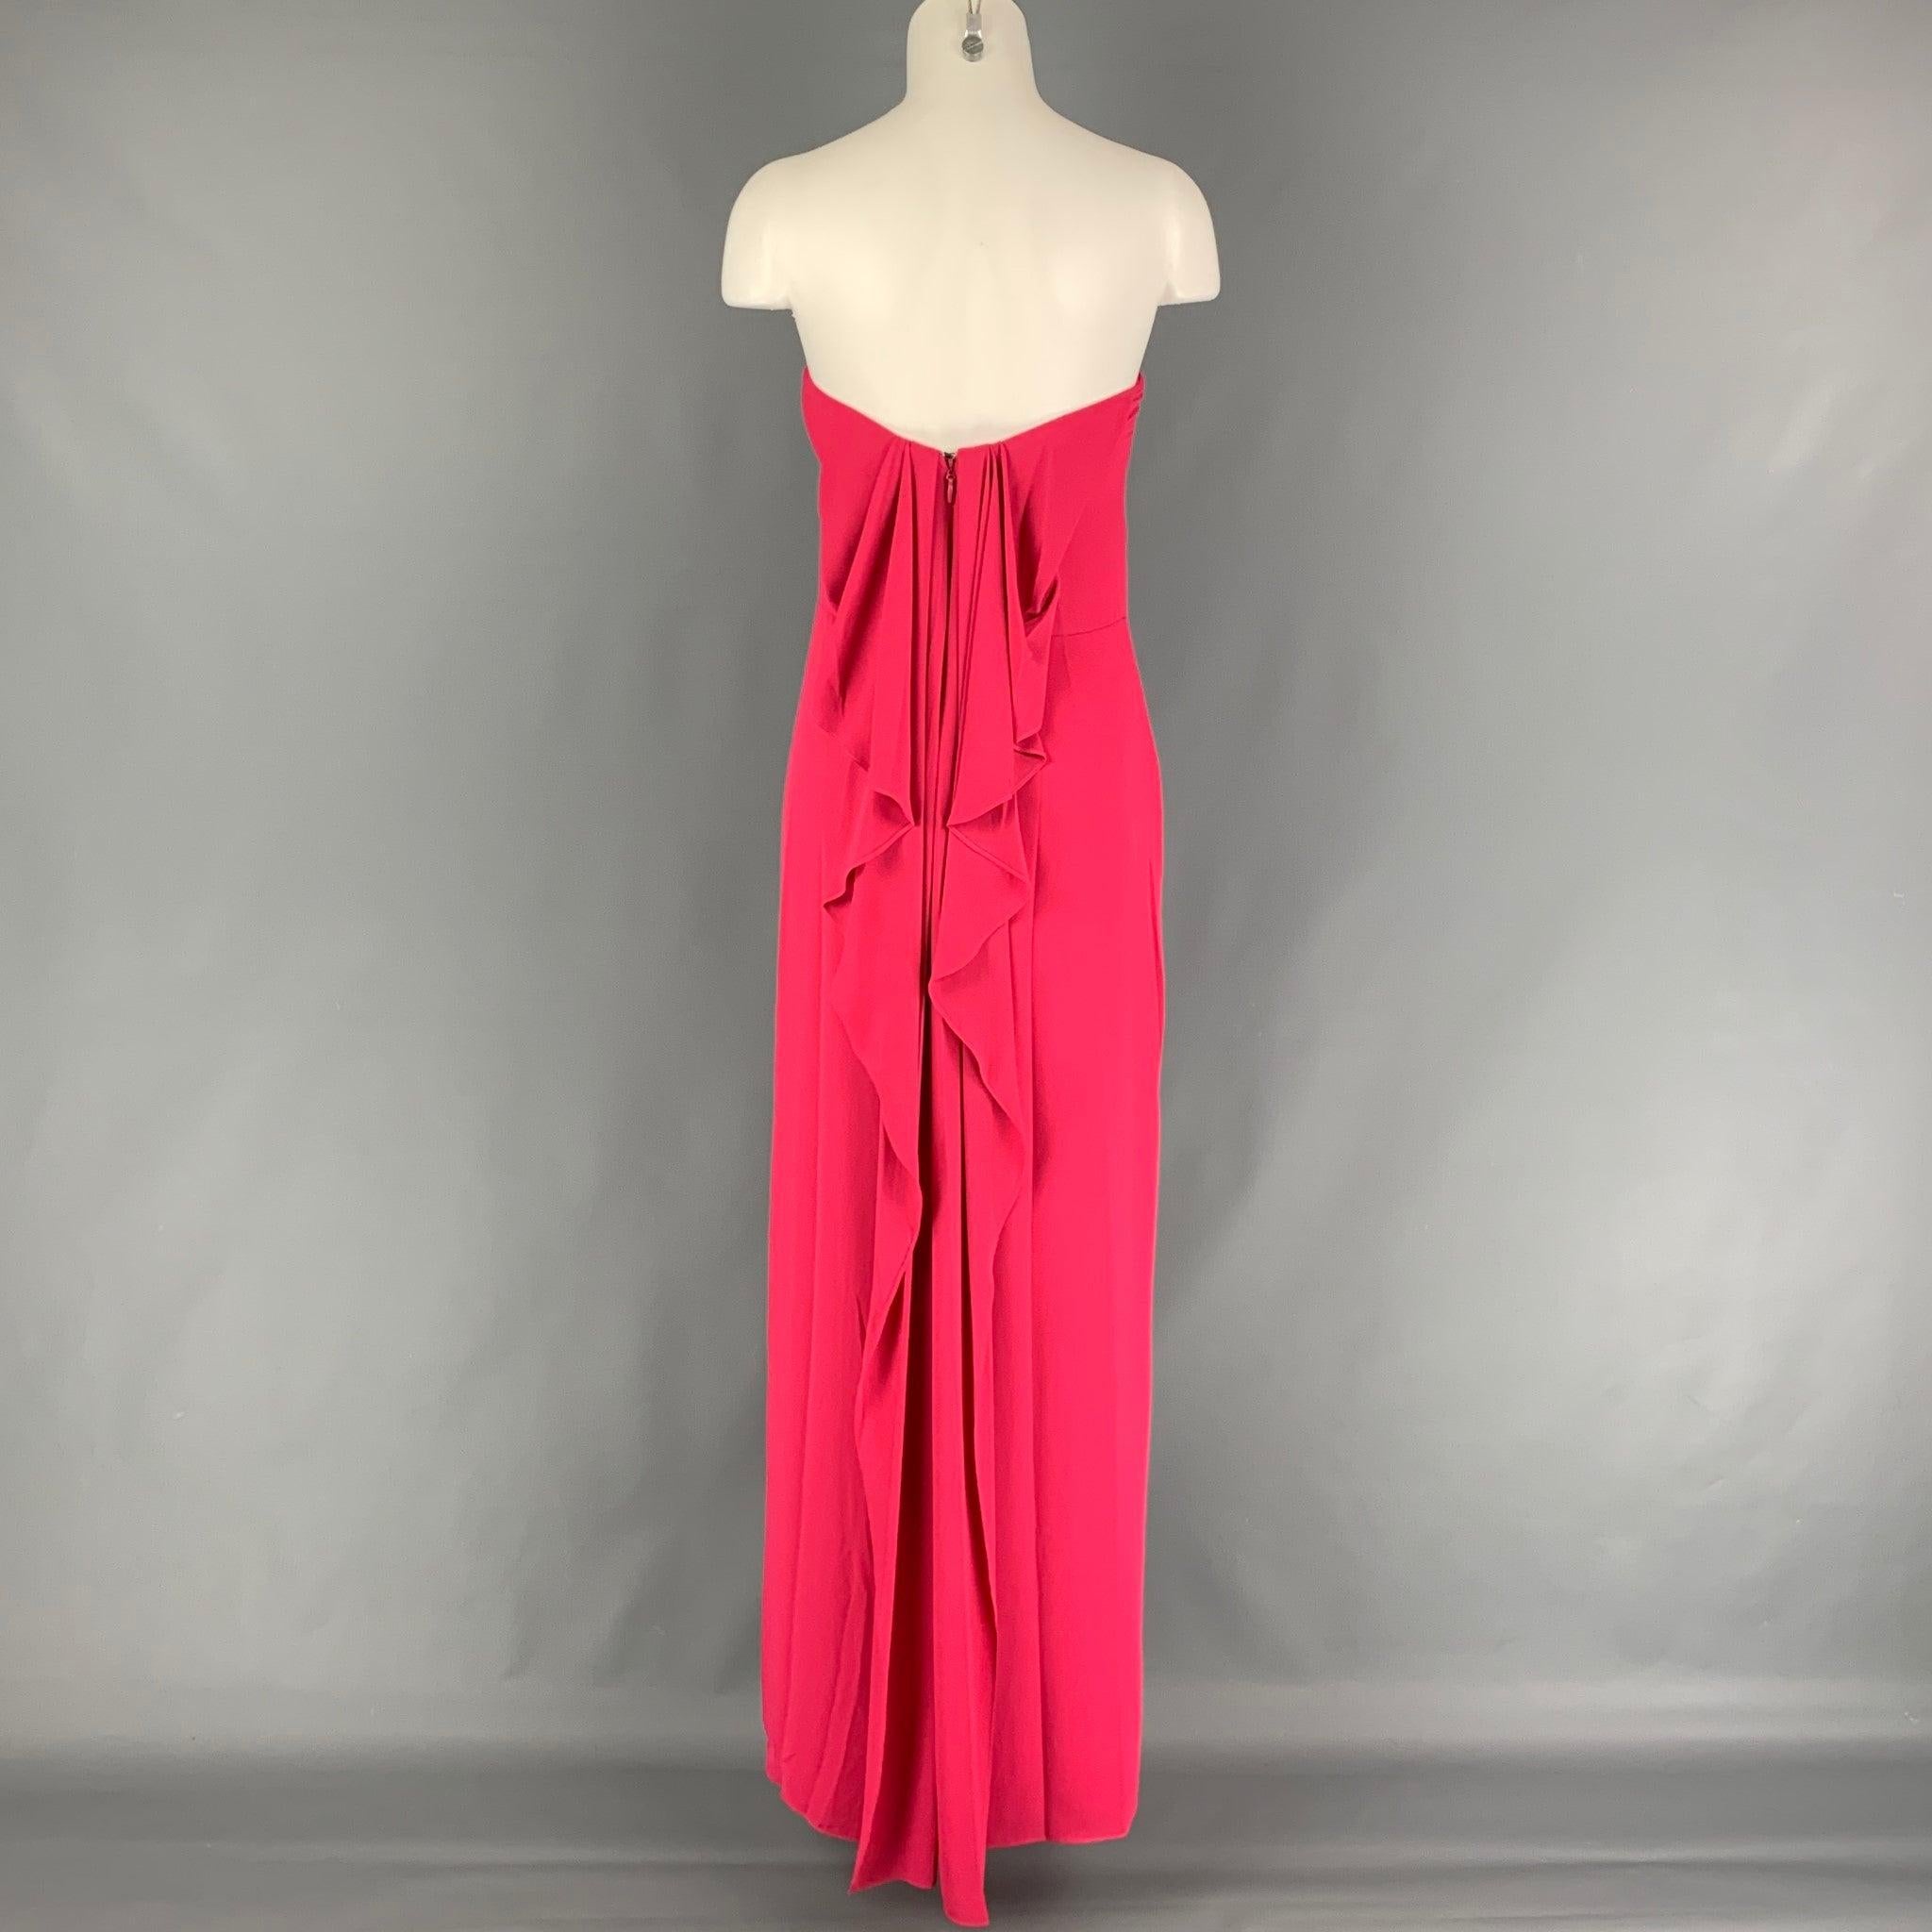 HALSTON HERITAGE Size 0 Pink Polyester Side Slit Strapless Dress In Good Condition For Sale In San Francisco, CA